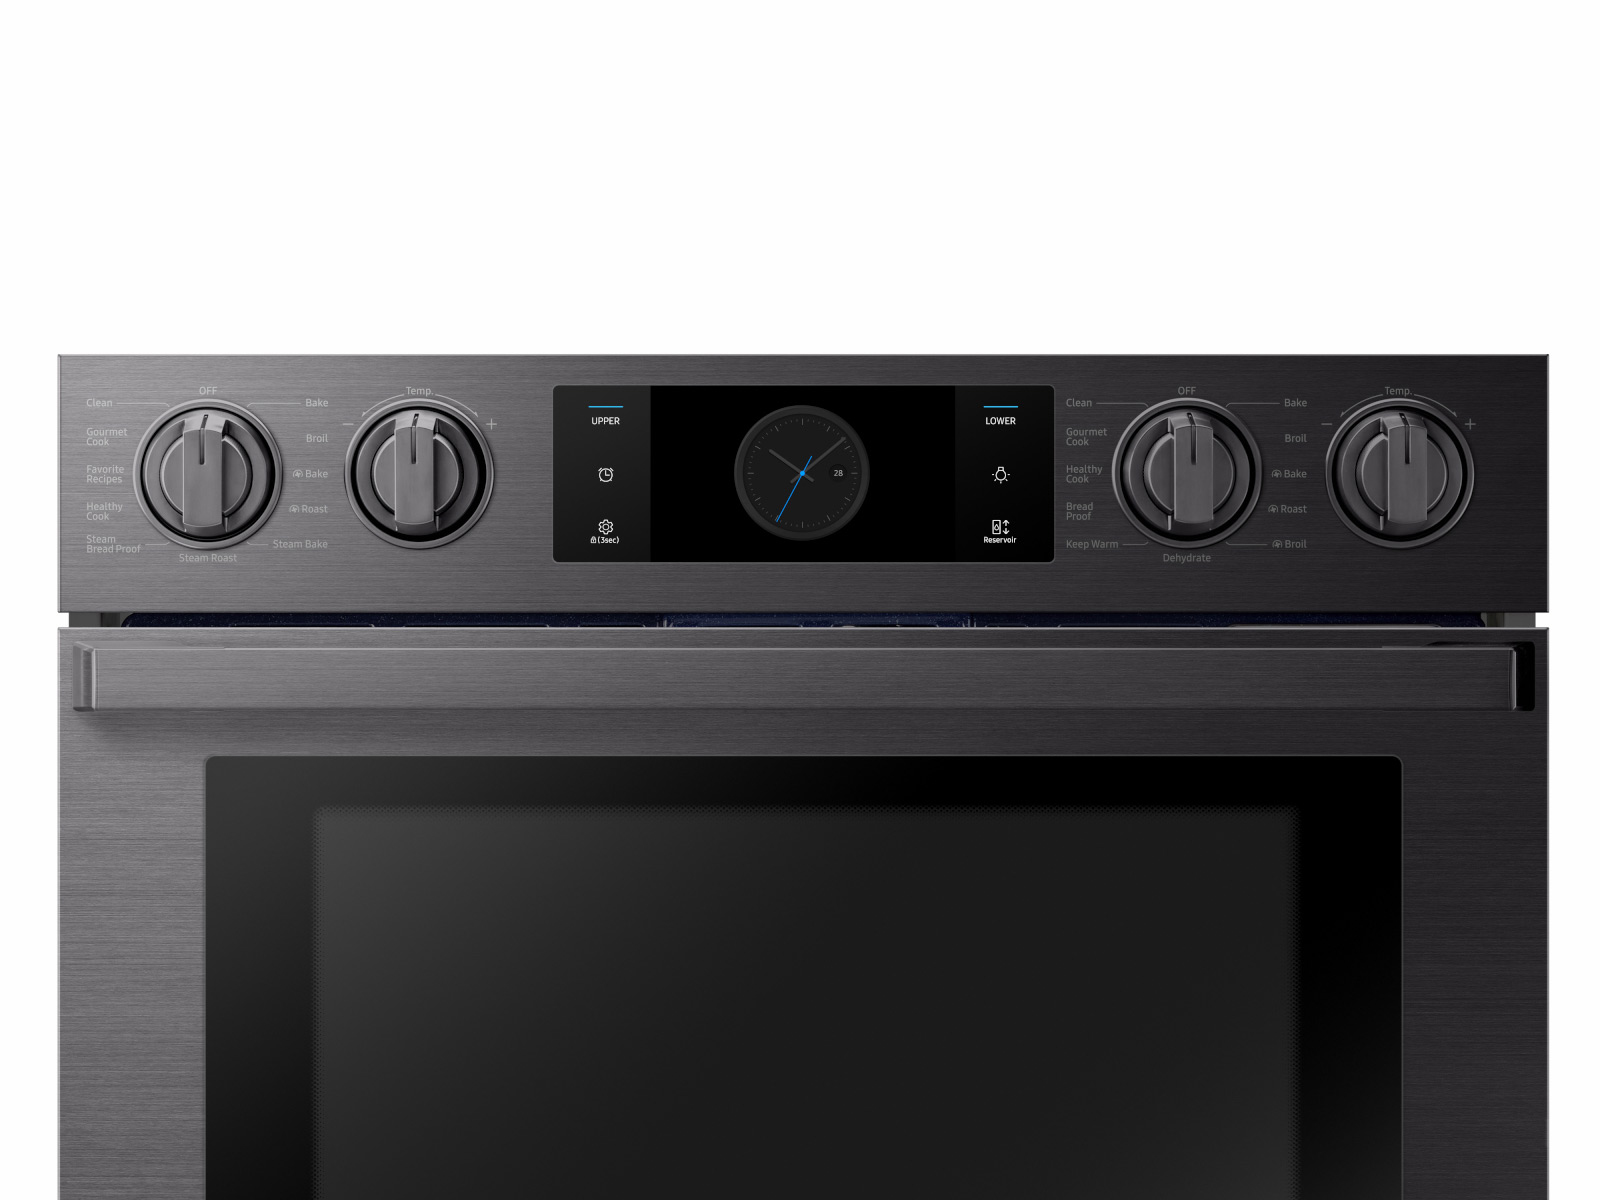 Smart Built-in Wall Ovens, Samsung US